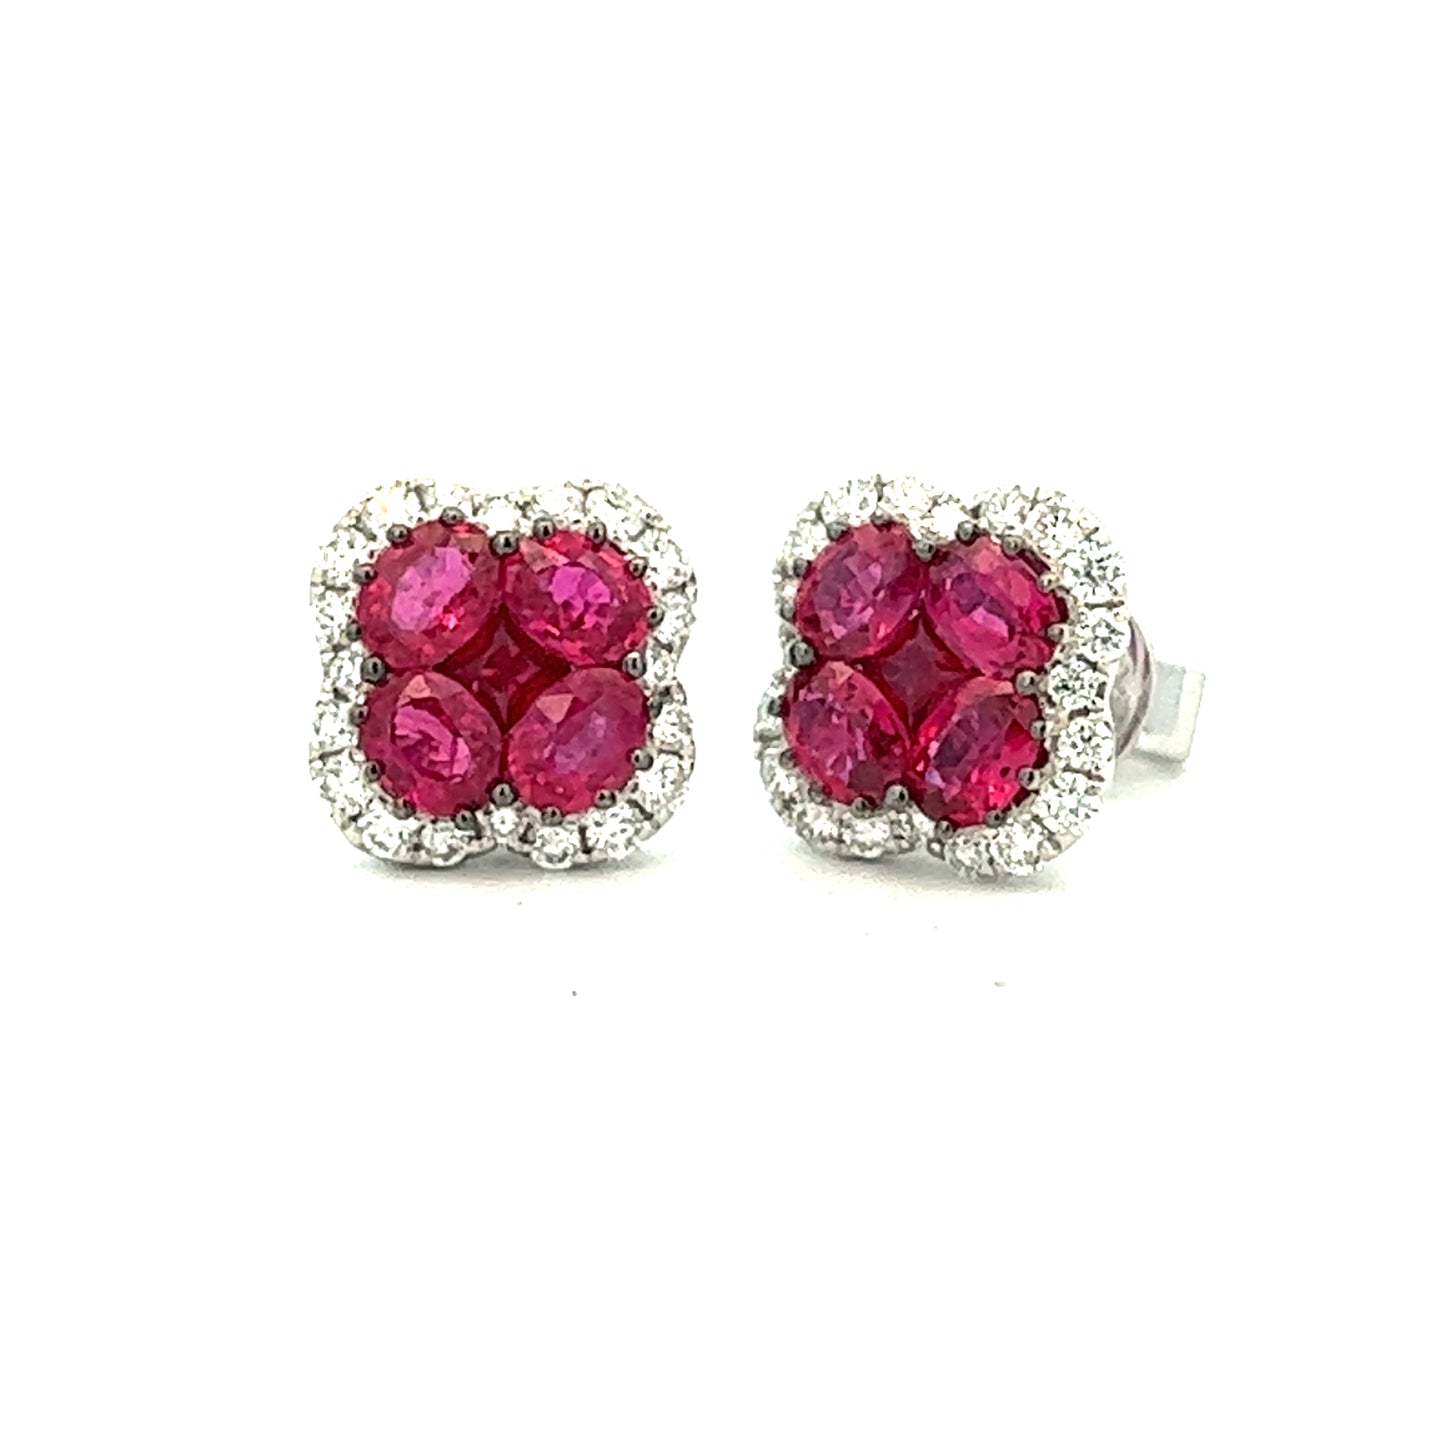 2.08cttw Ruby and Diamond Earrings | 18k White Gold